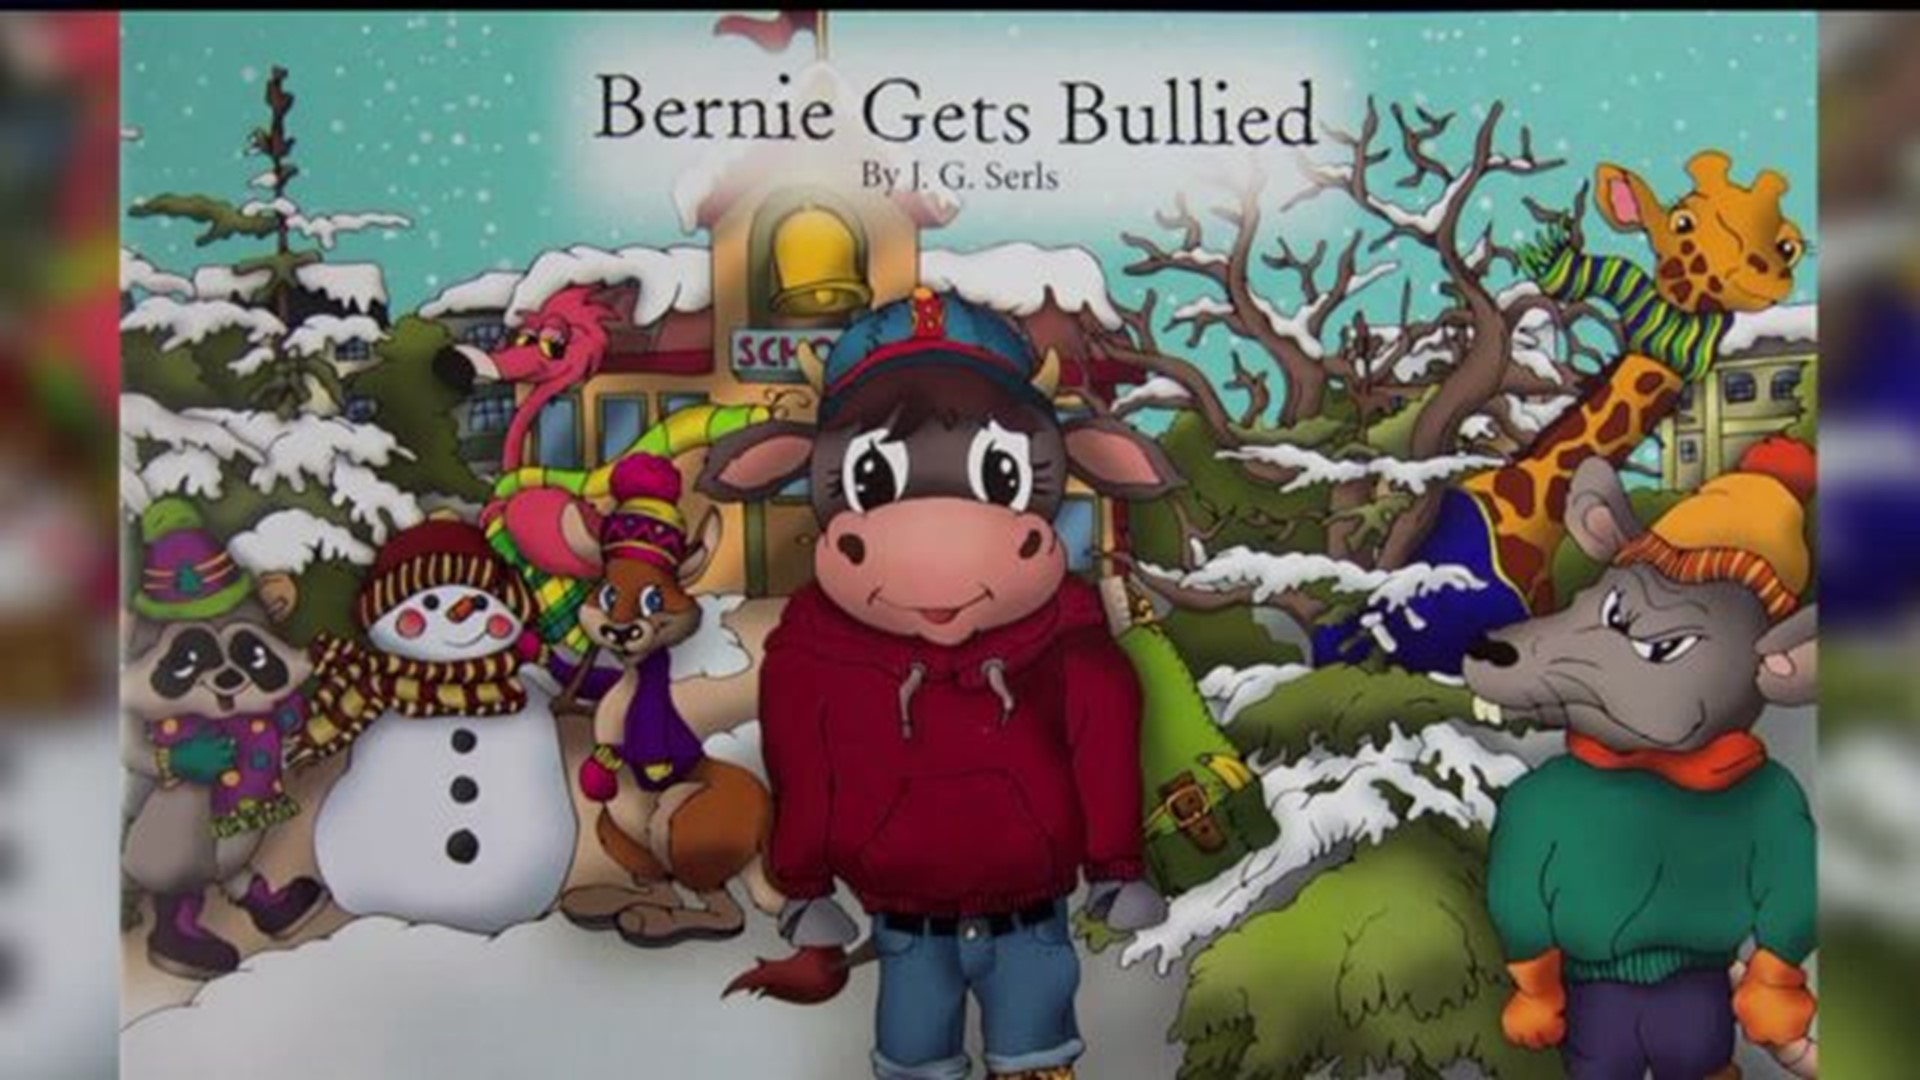 Jeremy Serls, author of "Bernie Gets Bullied", comes to the morning show